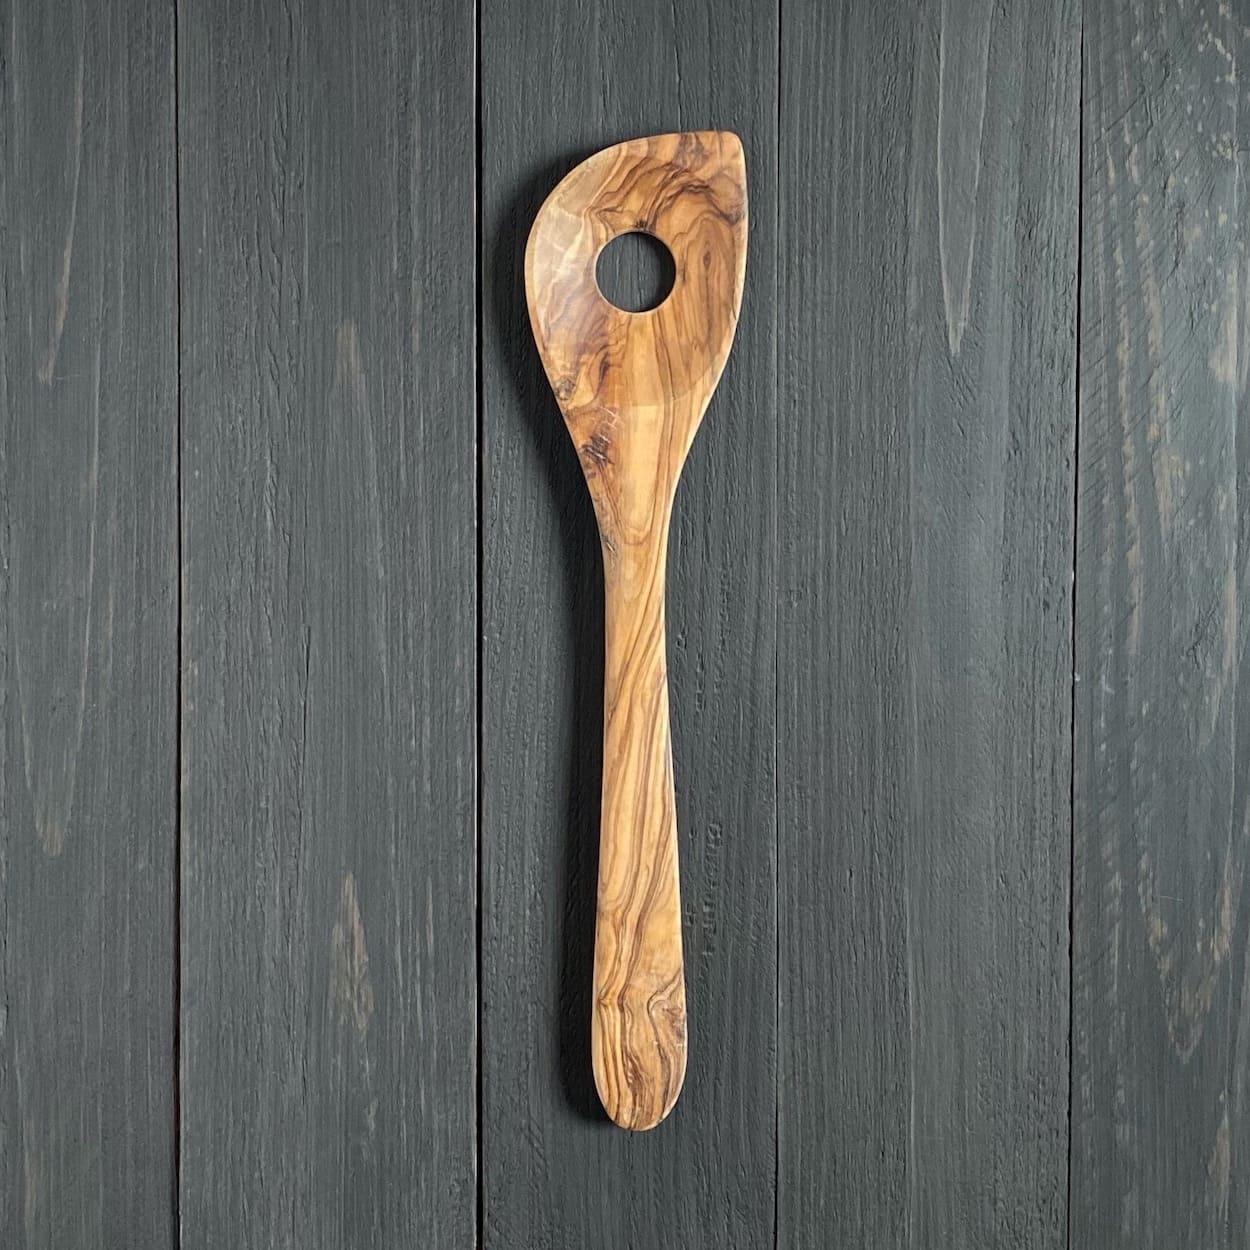 Olive Wood Risotto Spoon